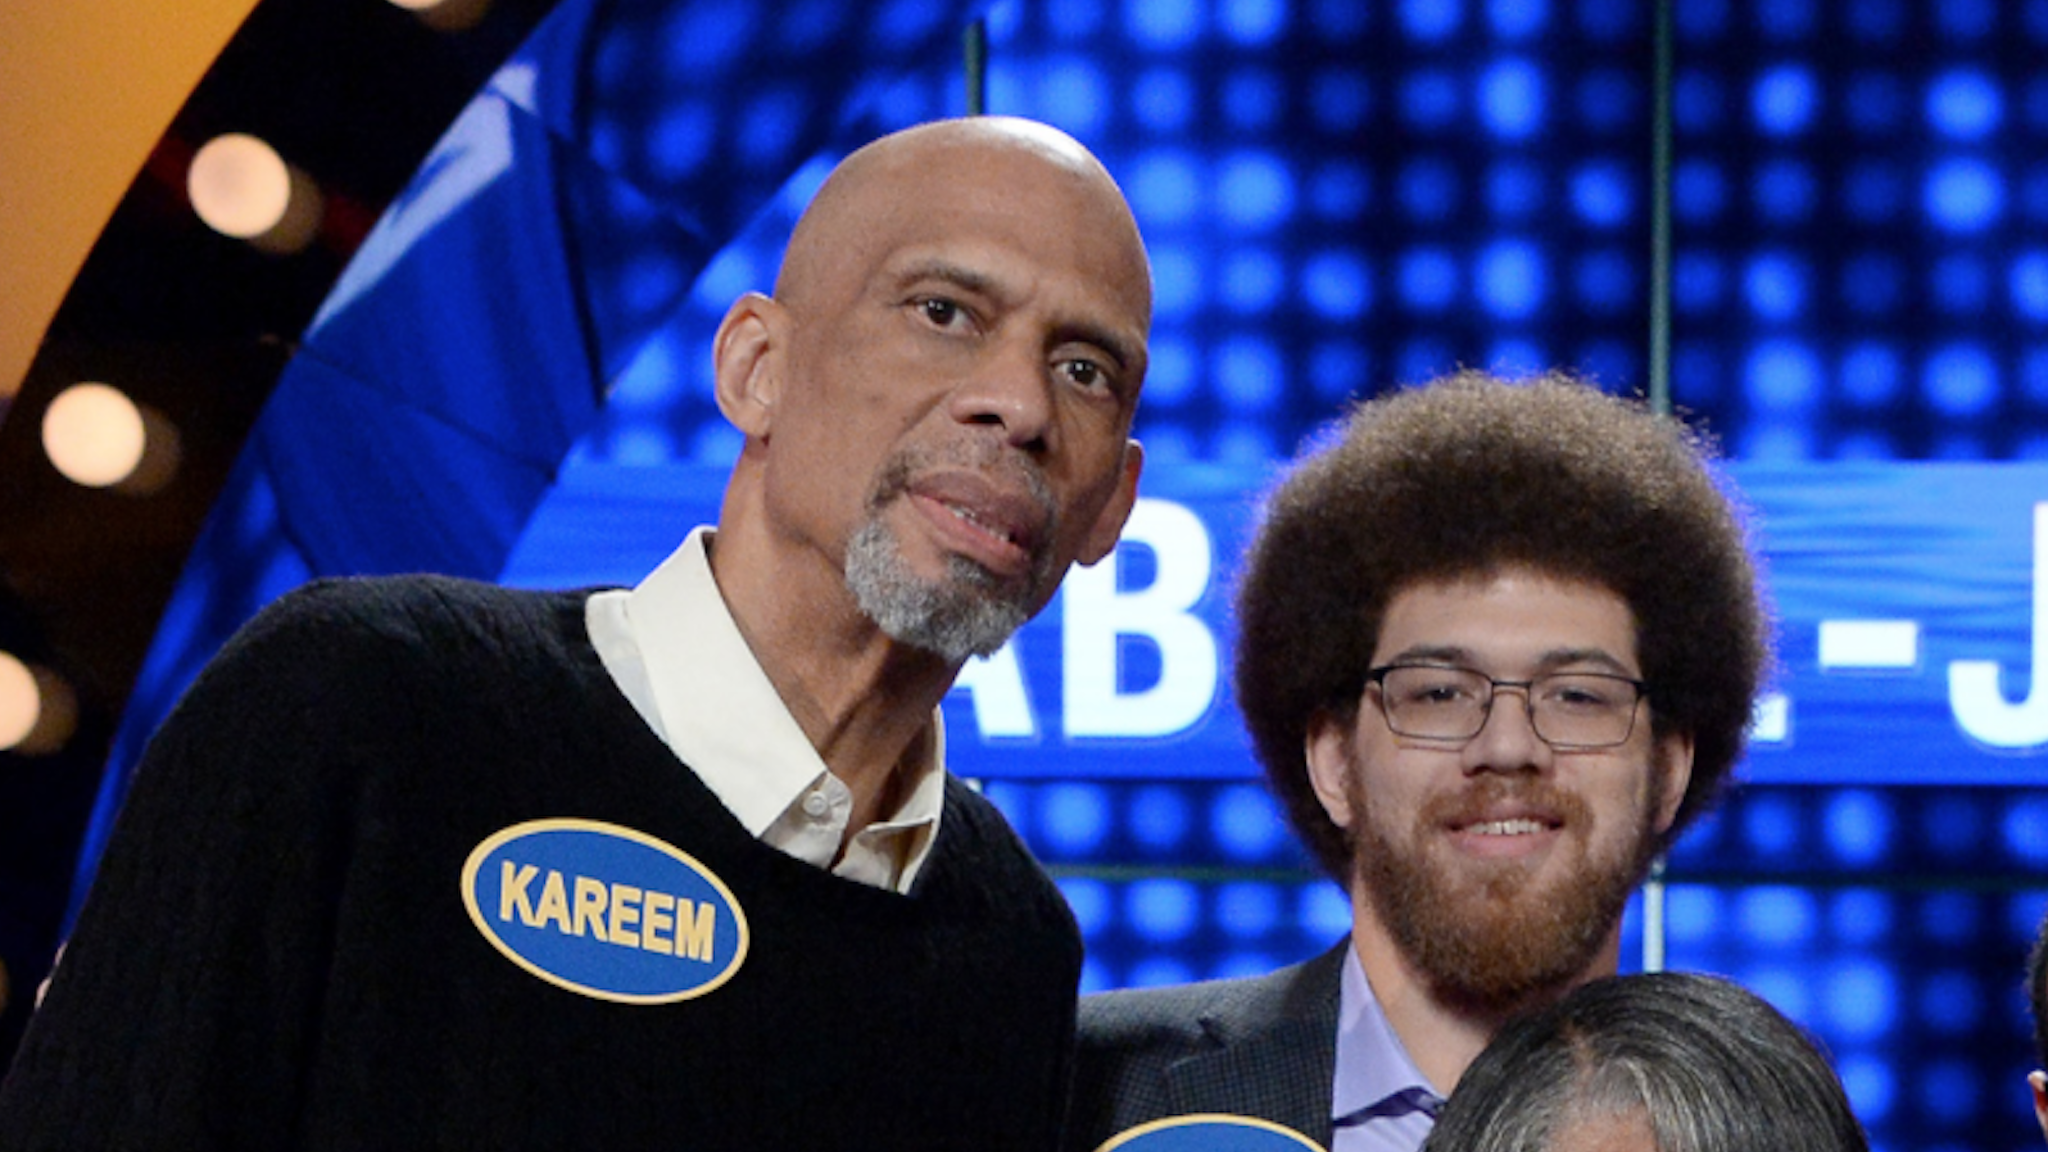 CELEBRITY FAMILY FEUD - "Harvey Family Men vs Harvey Family Women and Kareem Abdul-Jabbar vs Ralph Sampson"- The celebrity teams competing to win cash for their charities features Steve Harvey's wife, Marjorie Harvey, leading a team with their sons and sons-in-law, and the other team will be led by Mrs. Harvey's mother and the Harvey daughters. In a separate game, family members from the NBA's all-time leading scorer and six-time NBA champion Kareem Abdul-Jabbar will take on retired NBA Legend Ralph Sampson and his family. This episode of "Celebrity Family Feud" airs SUNDAY, JUNE 25 (8:00-9:00 p.m. EDT), on The Walt Disney Television via Getty Images Television Network..